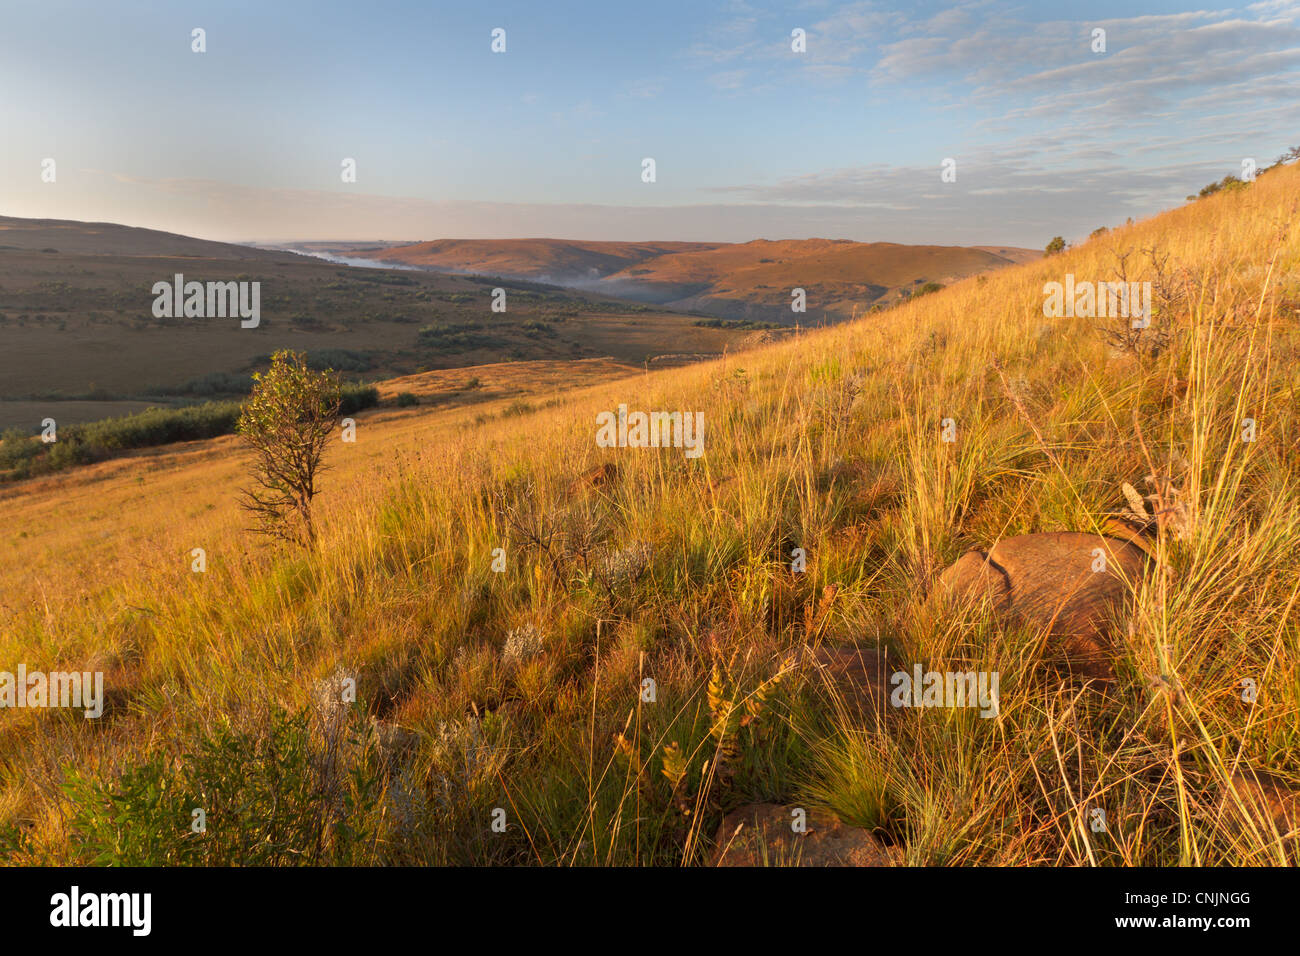 Lovely vista of rolling hills covered in mist on the South African Highlands Meander Stock Photo